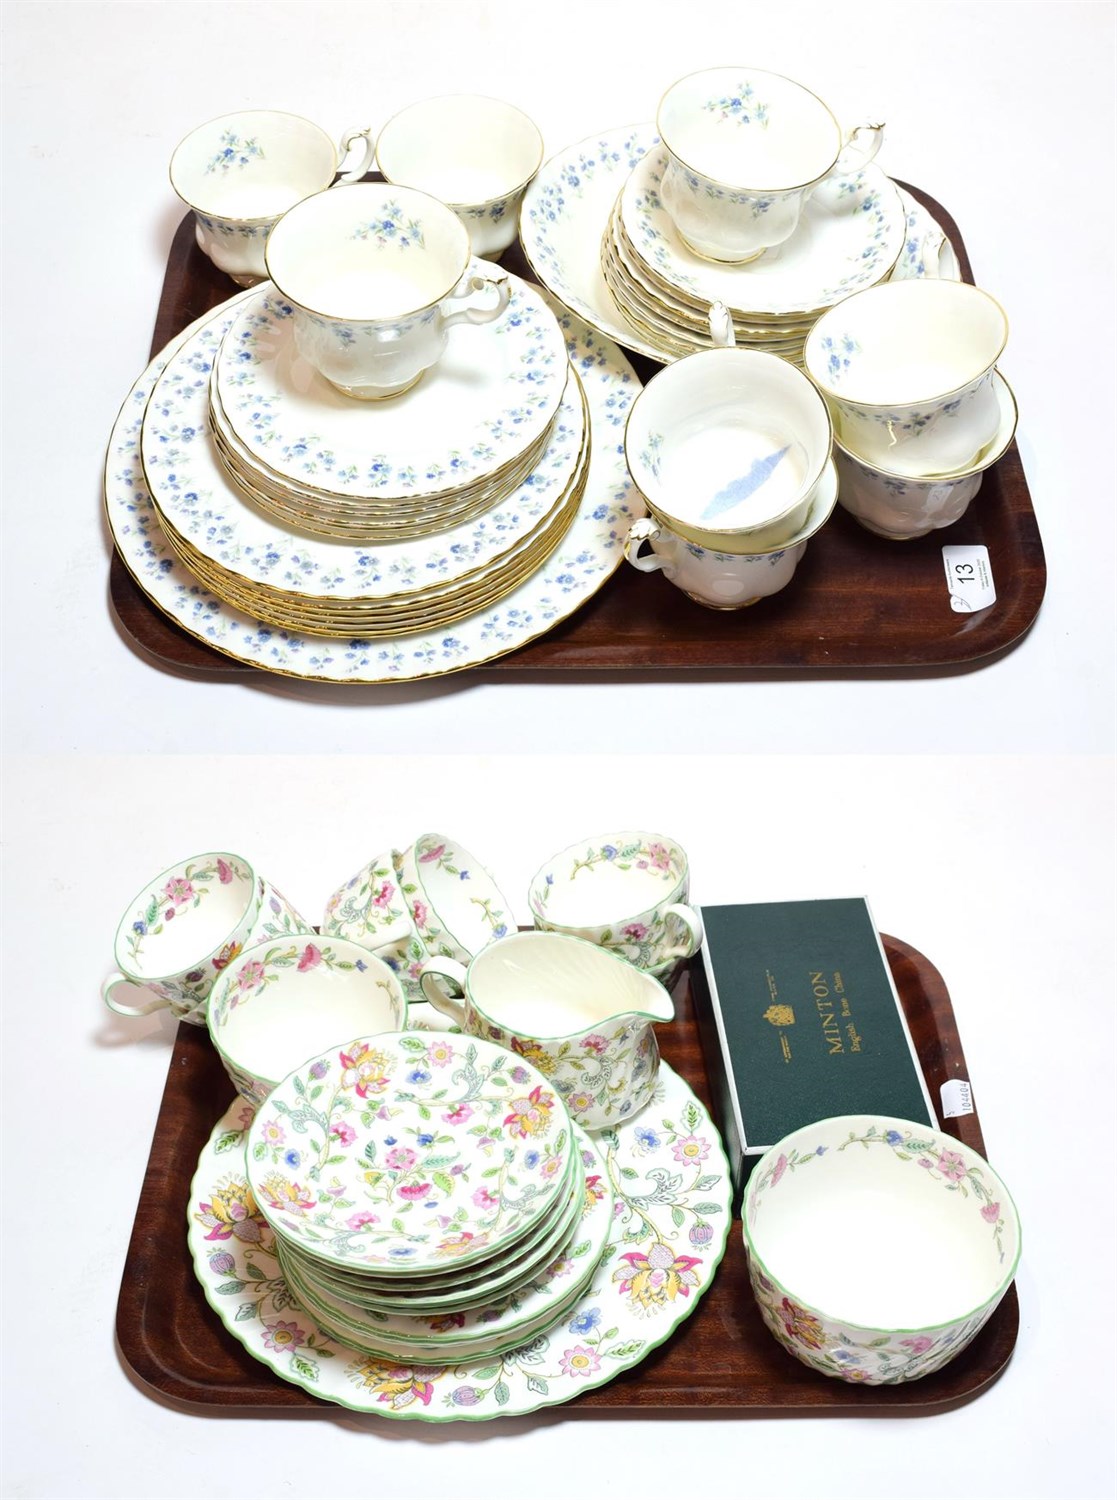 Lot 13 - A Royal Albert 'Memory Lane' patterned part tea service, together with a quantity of Minton 'Haddon